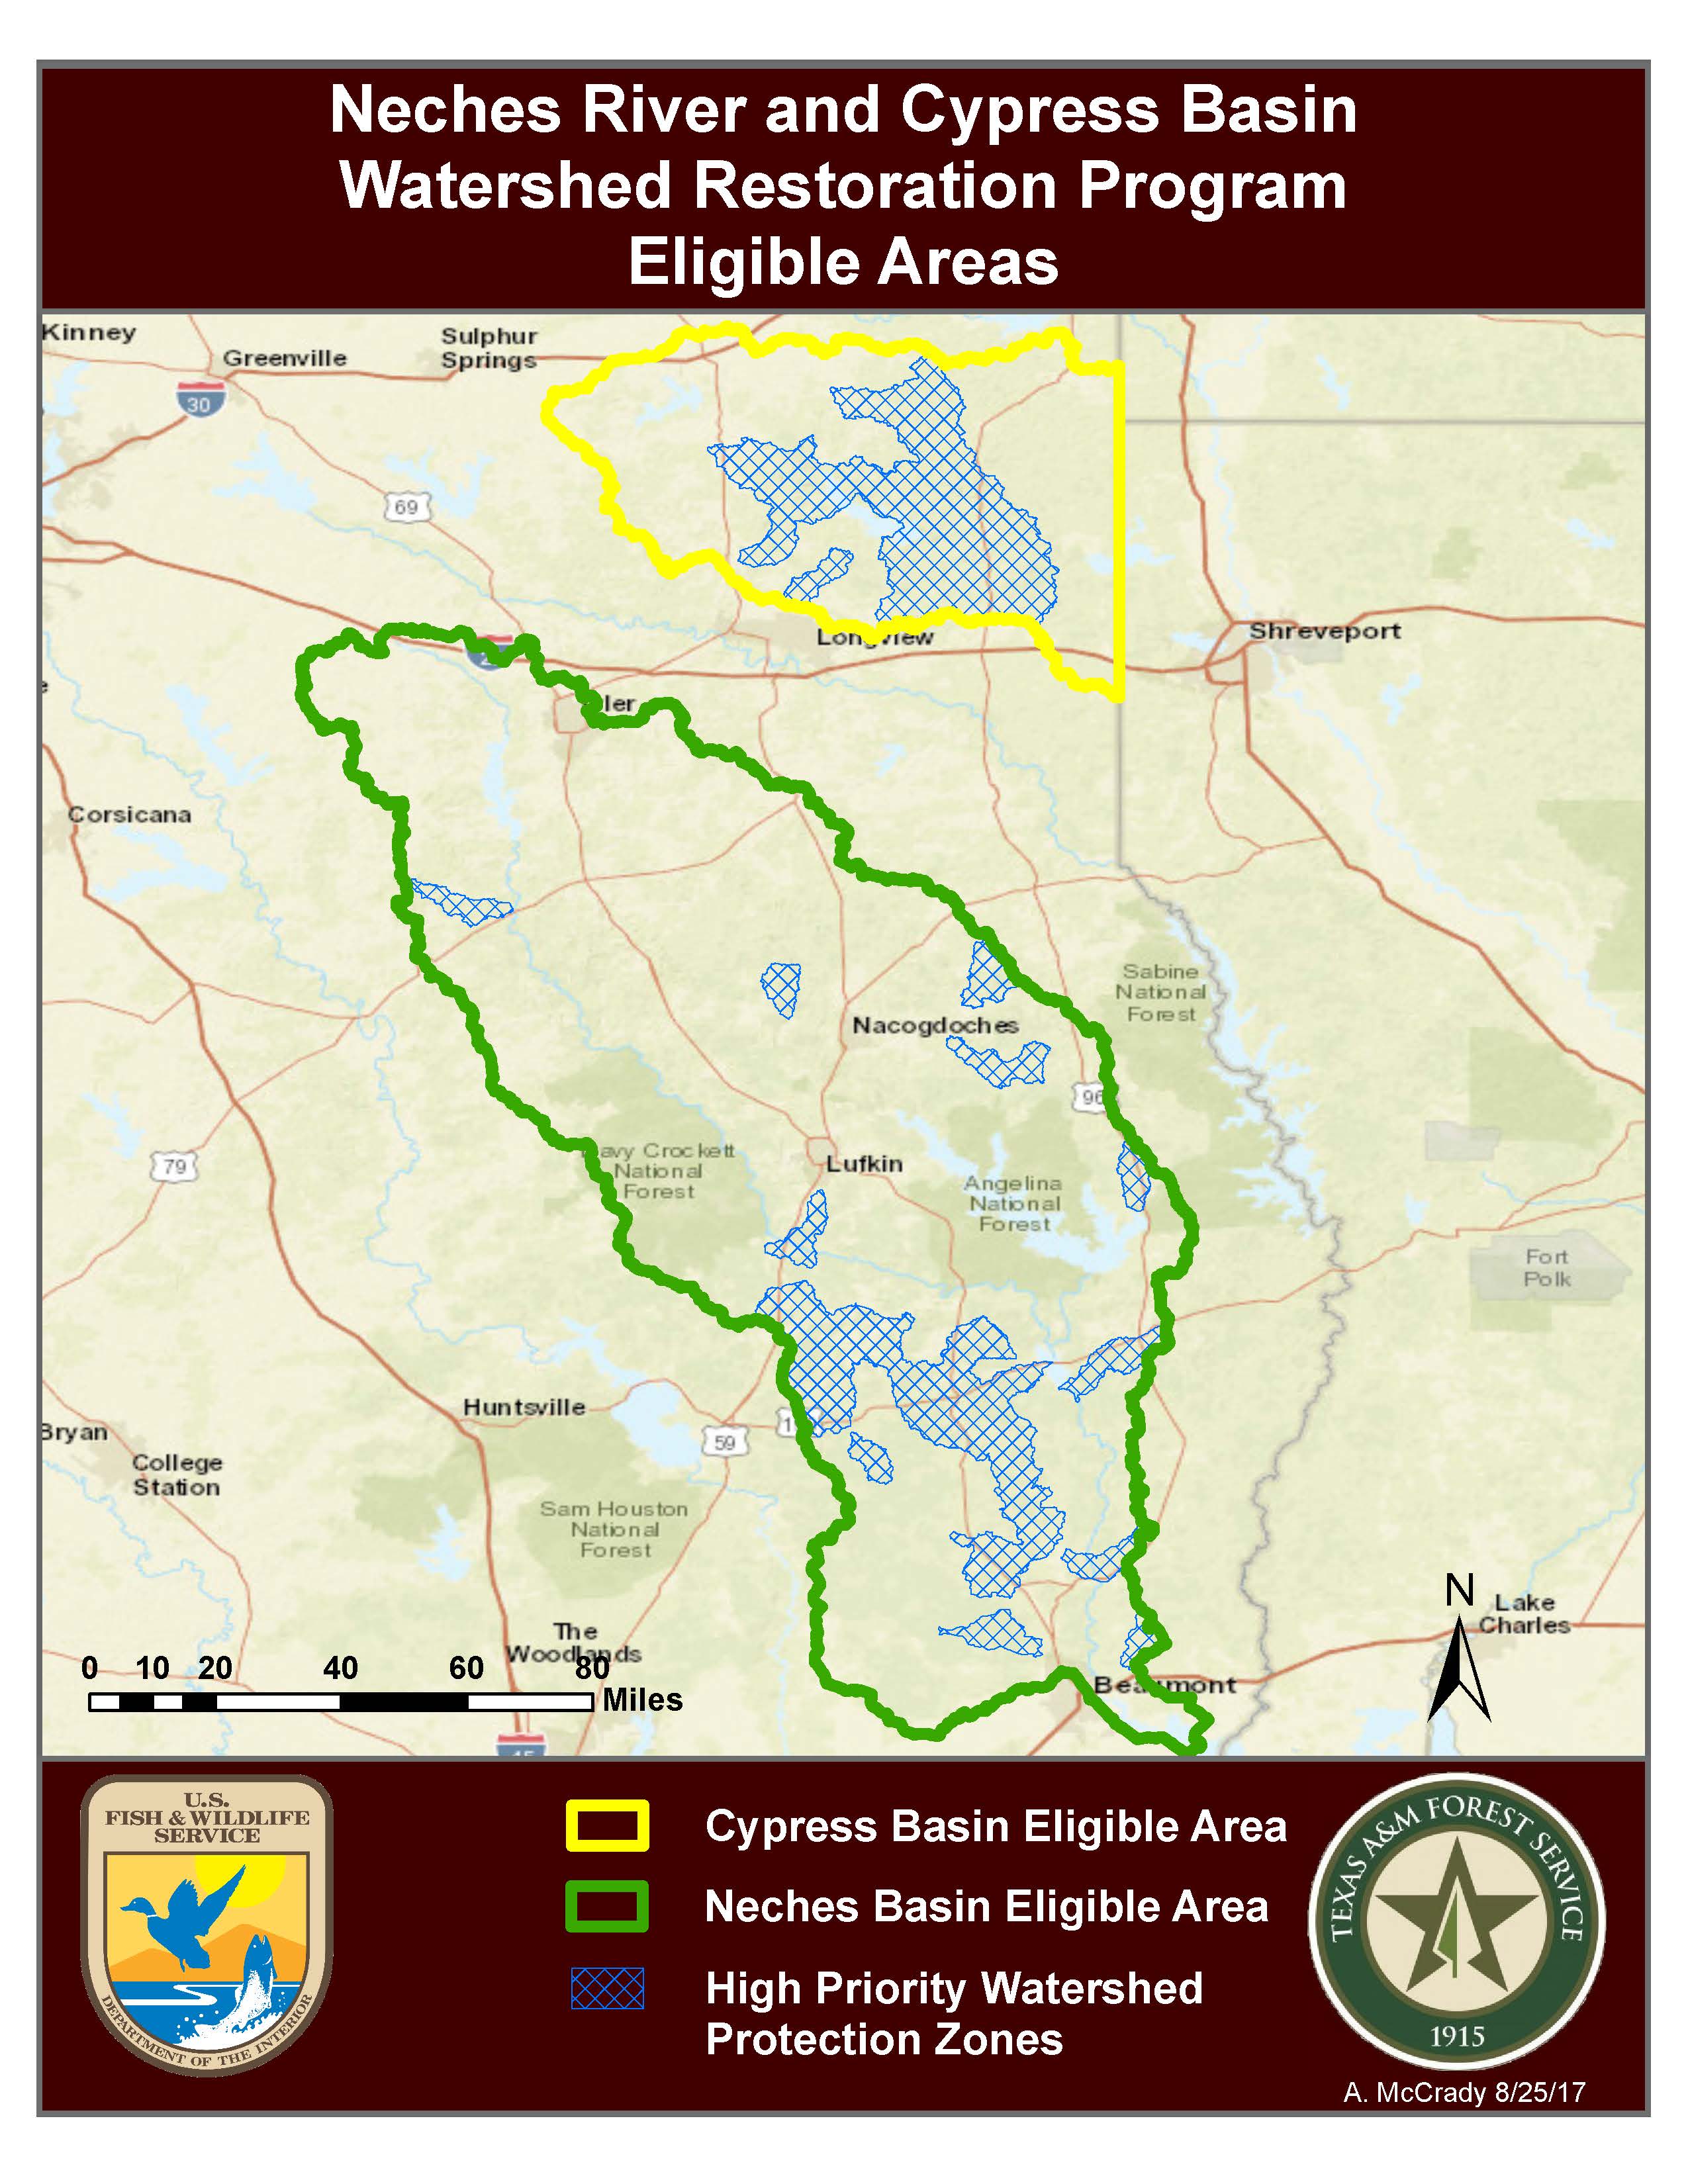 Neches River and Cypress Basin Watershed Restoration Program Eligible Areas